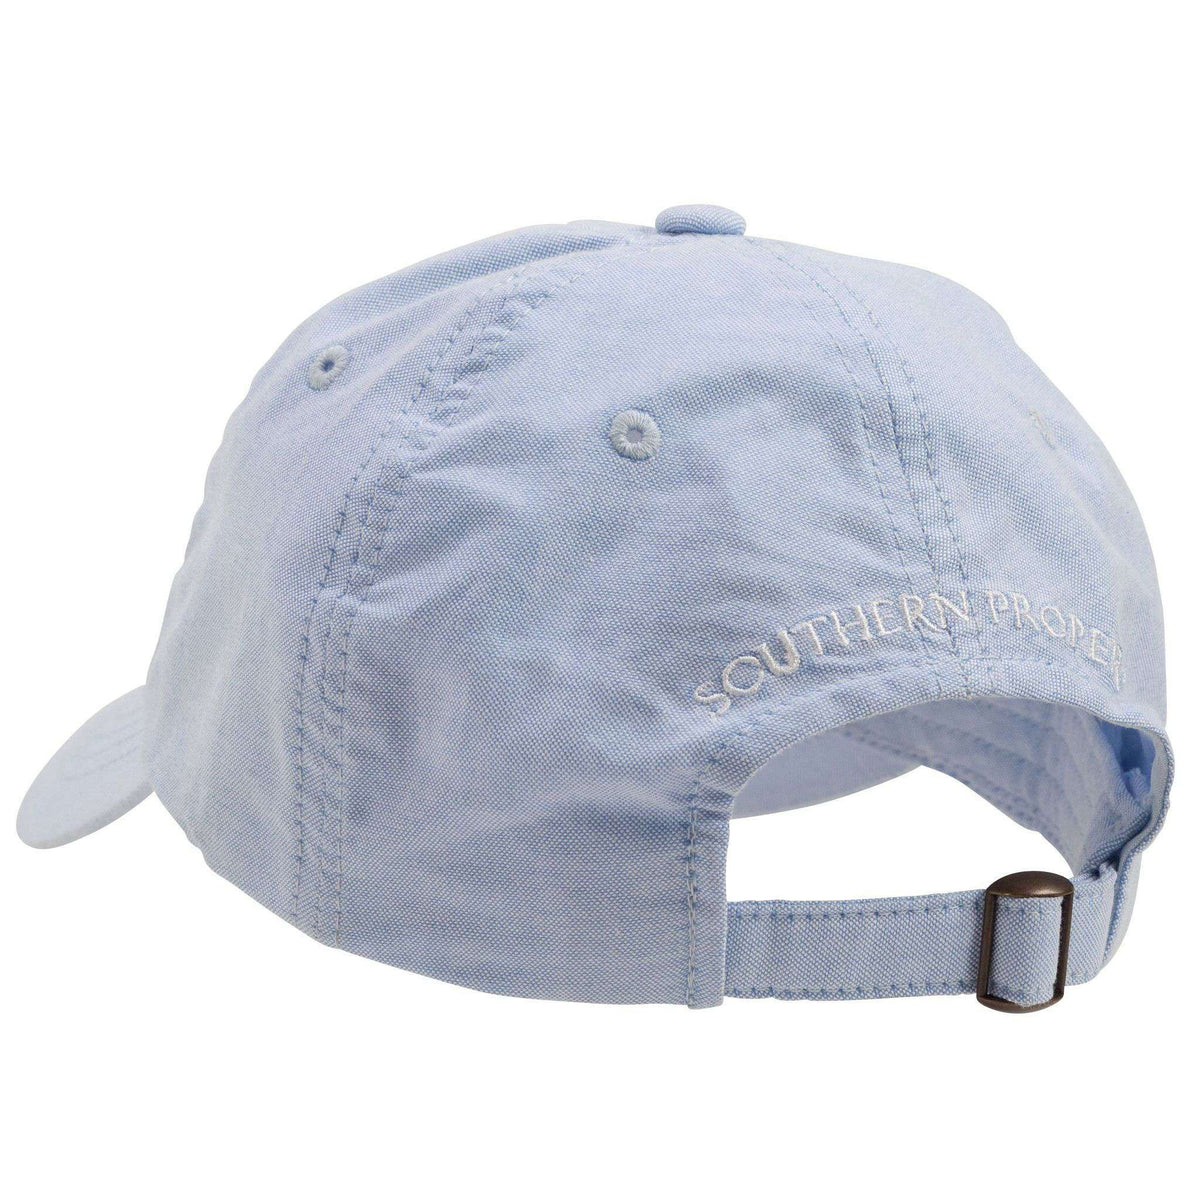 Frat Hat in Hydrangea Blue by Southern Proper - Country Club Prep